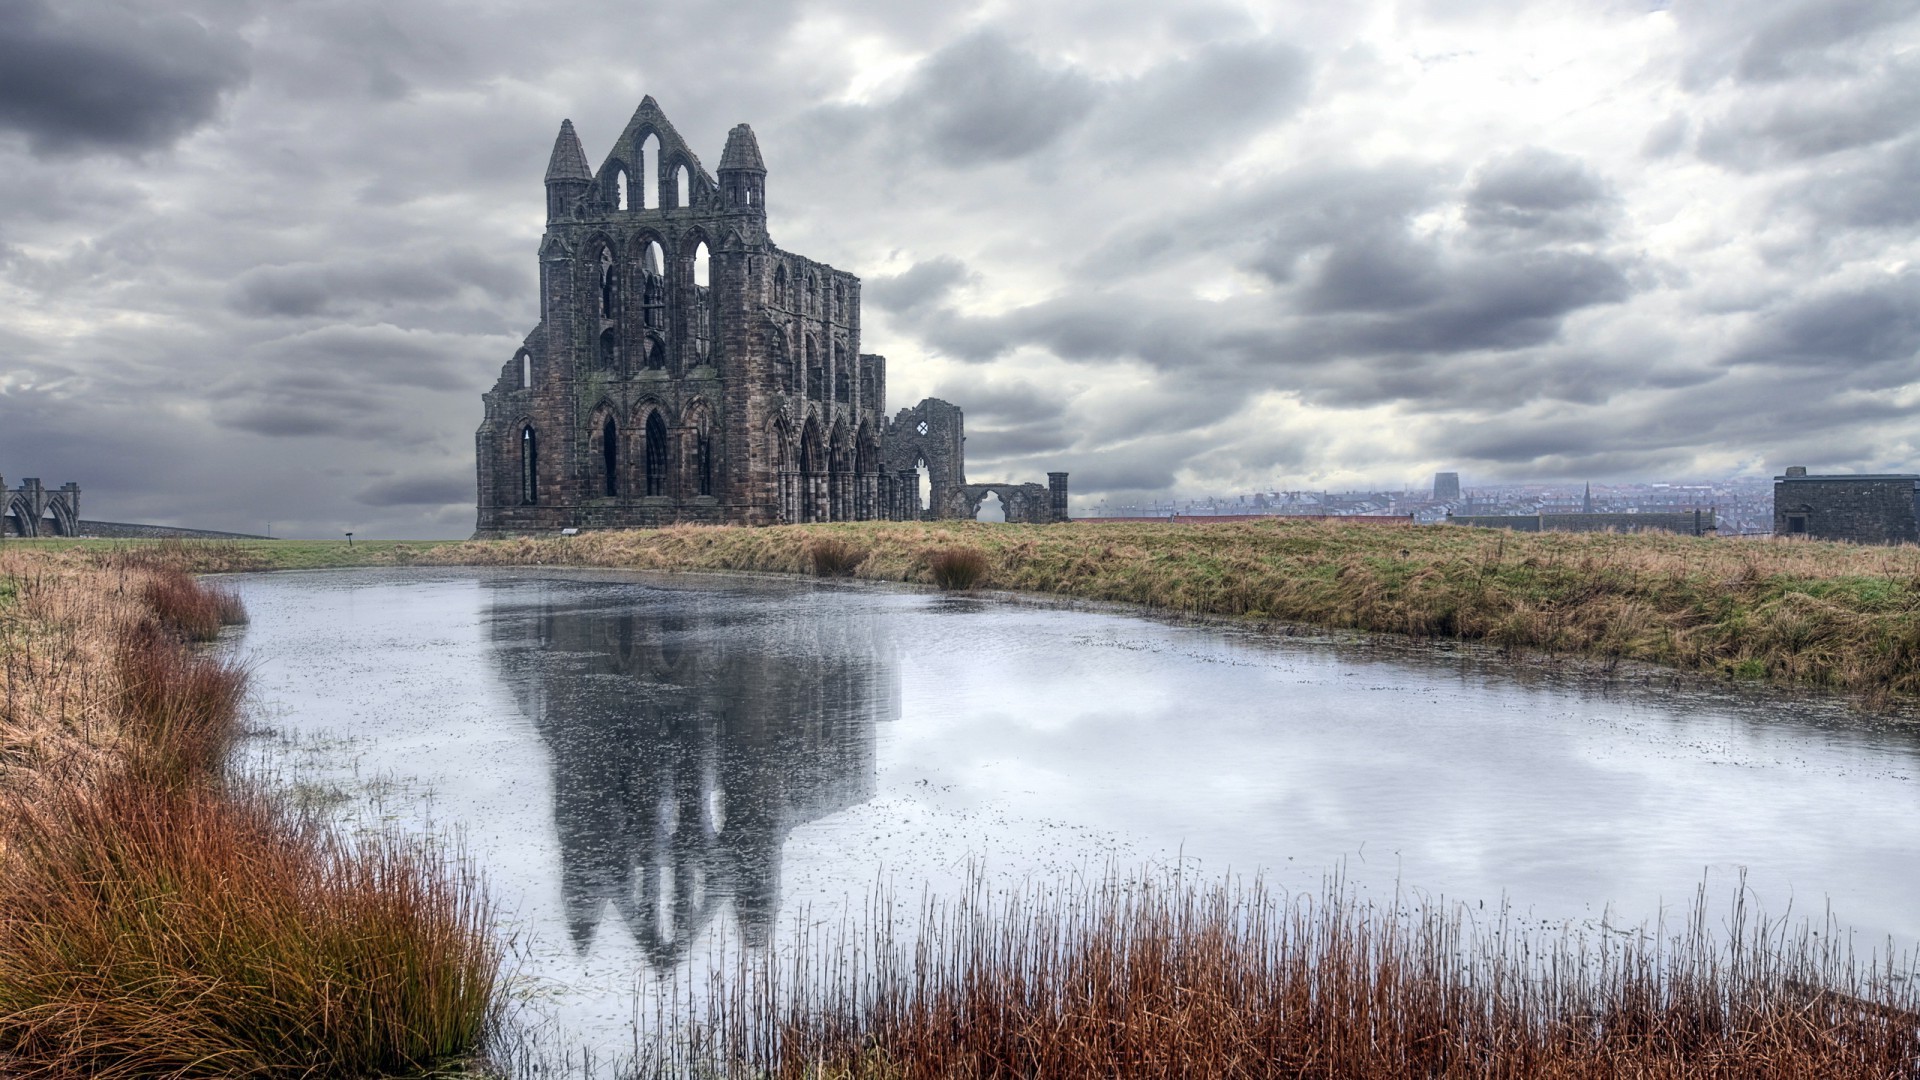 church, Ruin, Scotland, UK, Reflection, Overcast, Clouds, Cathedral Wallpaper